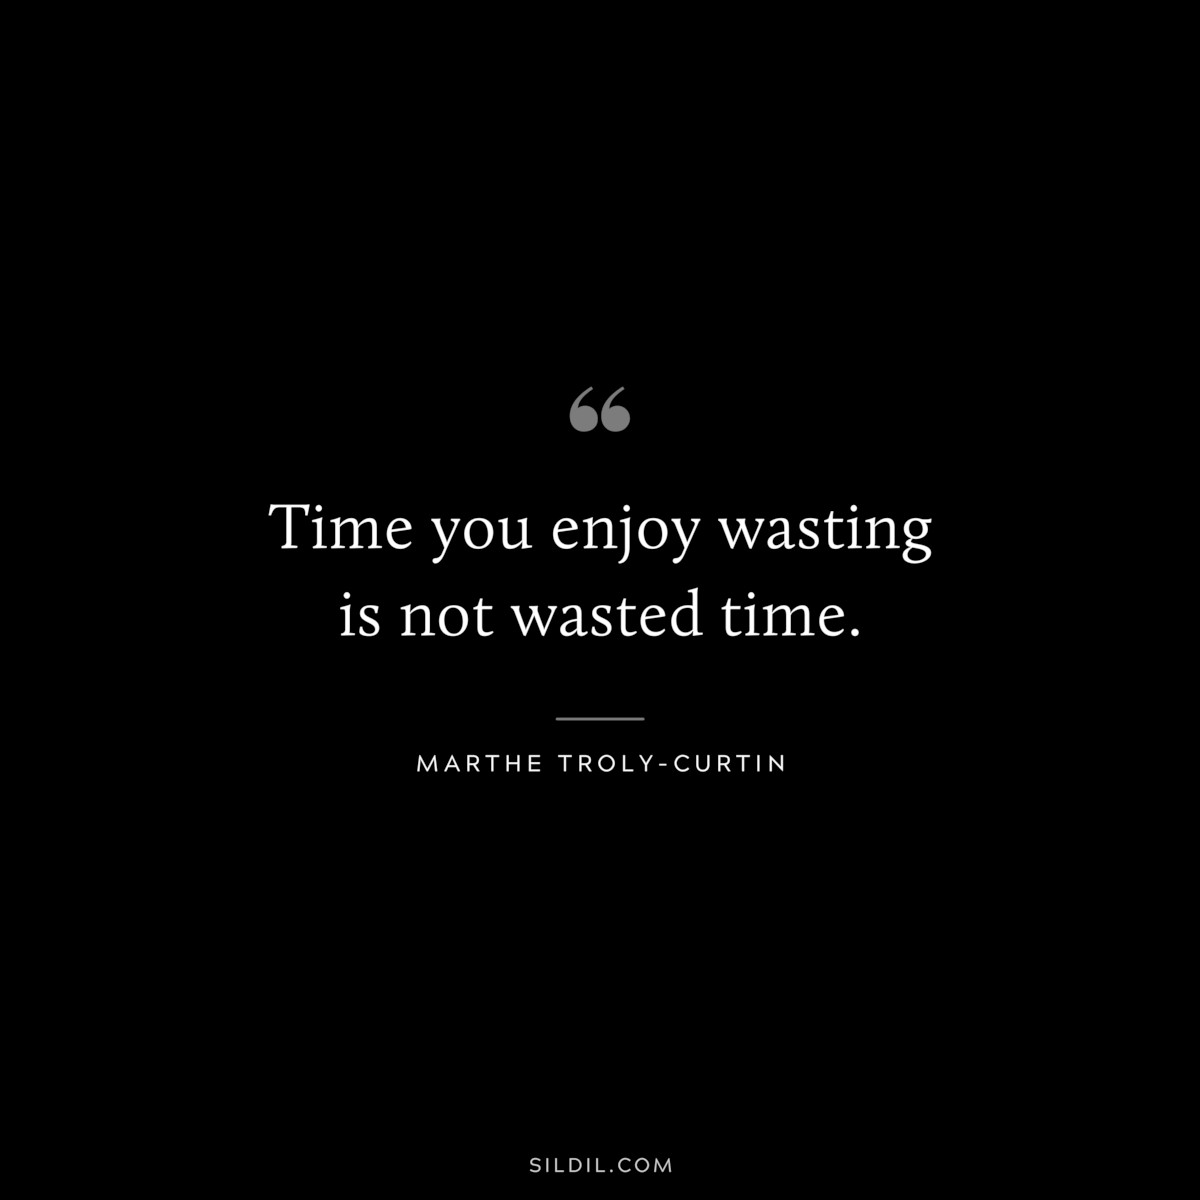 Time you enjoy wasting is not wasted time. ― Marthe Troly-Curtin